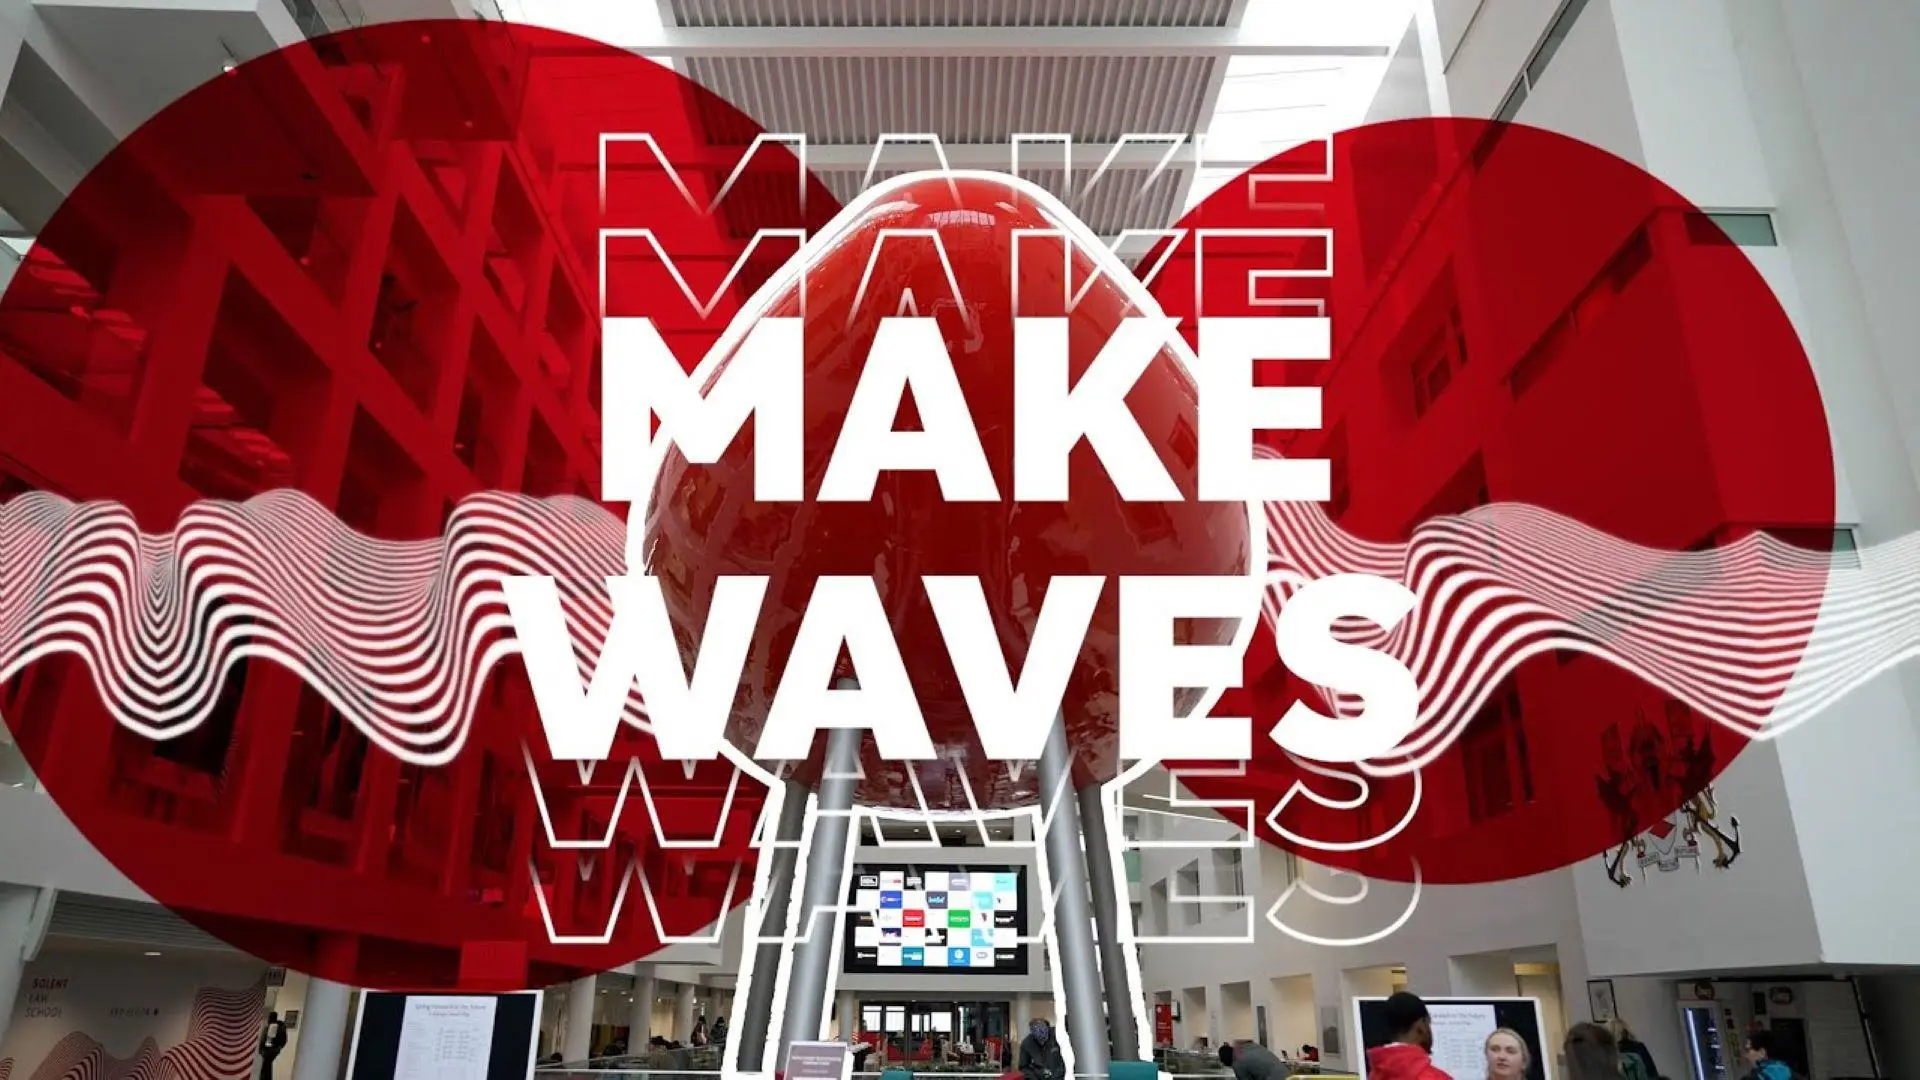 Make Waves text over the Pod